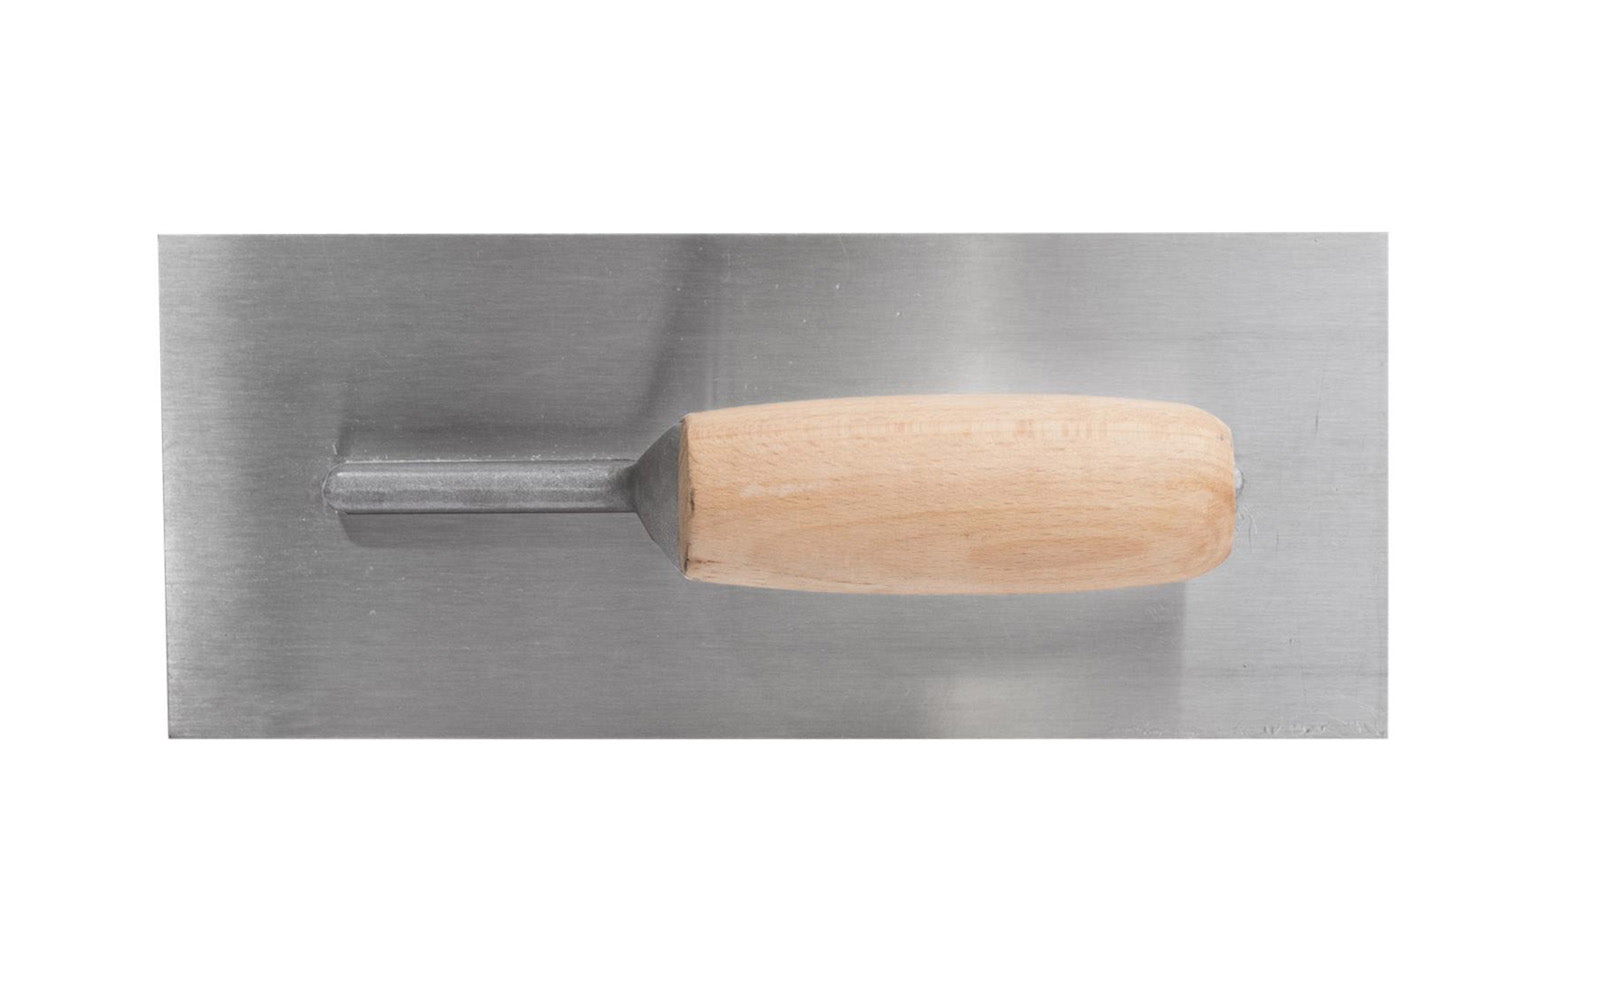 This Marshalltown 11" x 4-1/2" Finishing Trowel has a cast aluminum mounting securely riveted to the tempered, polished steel blade. Model 990S.